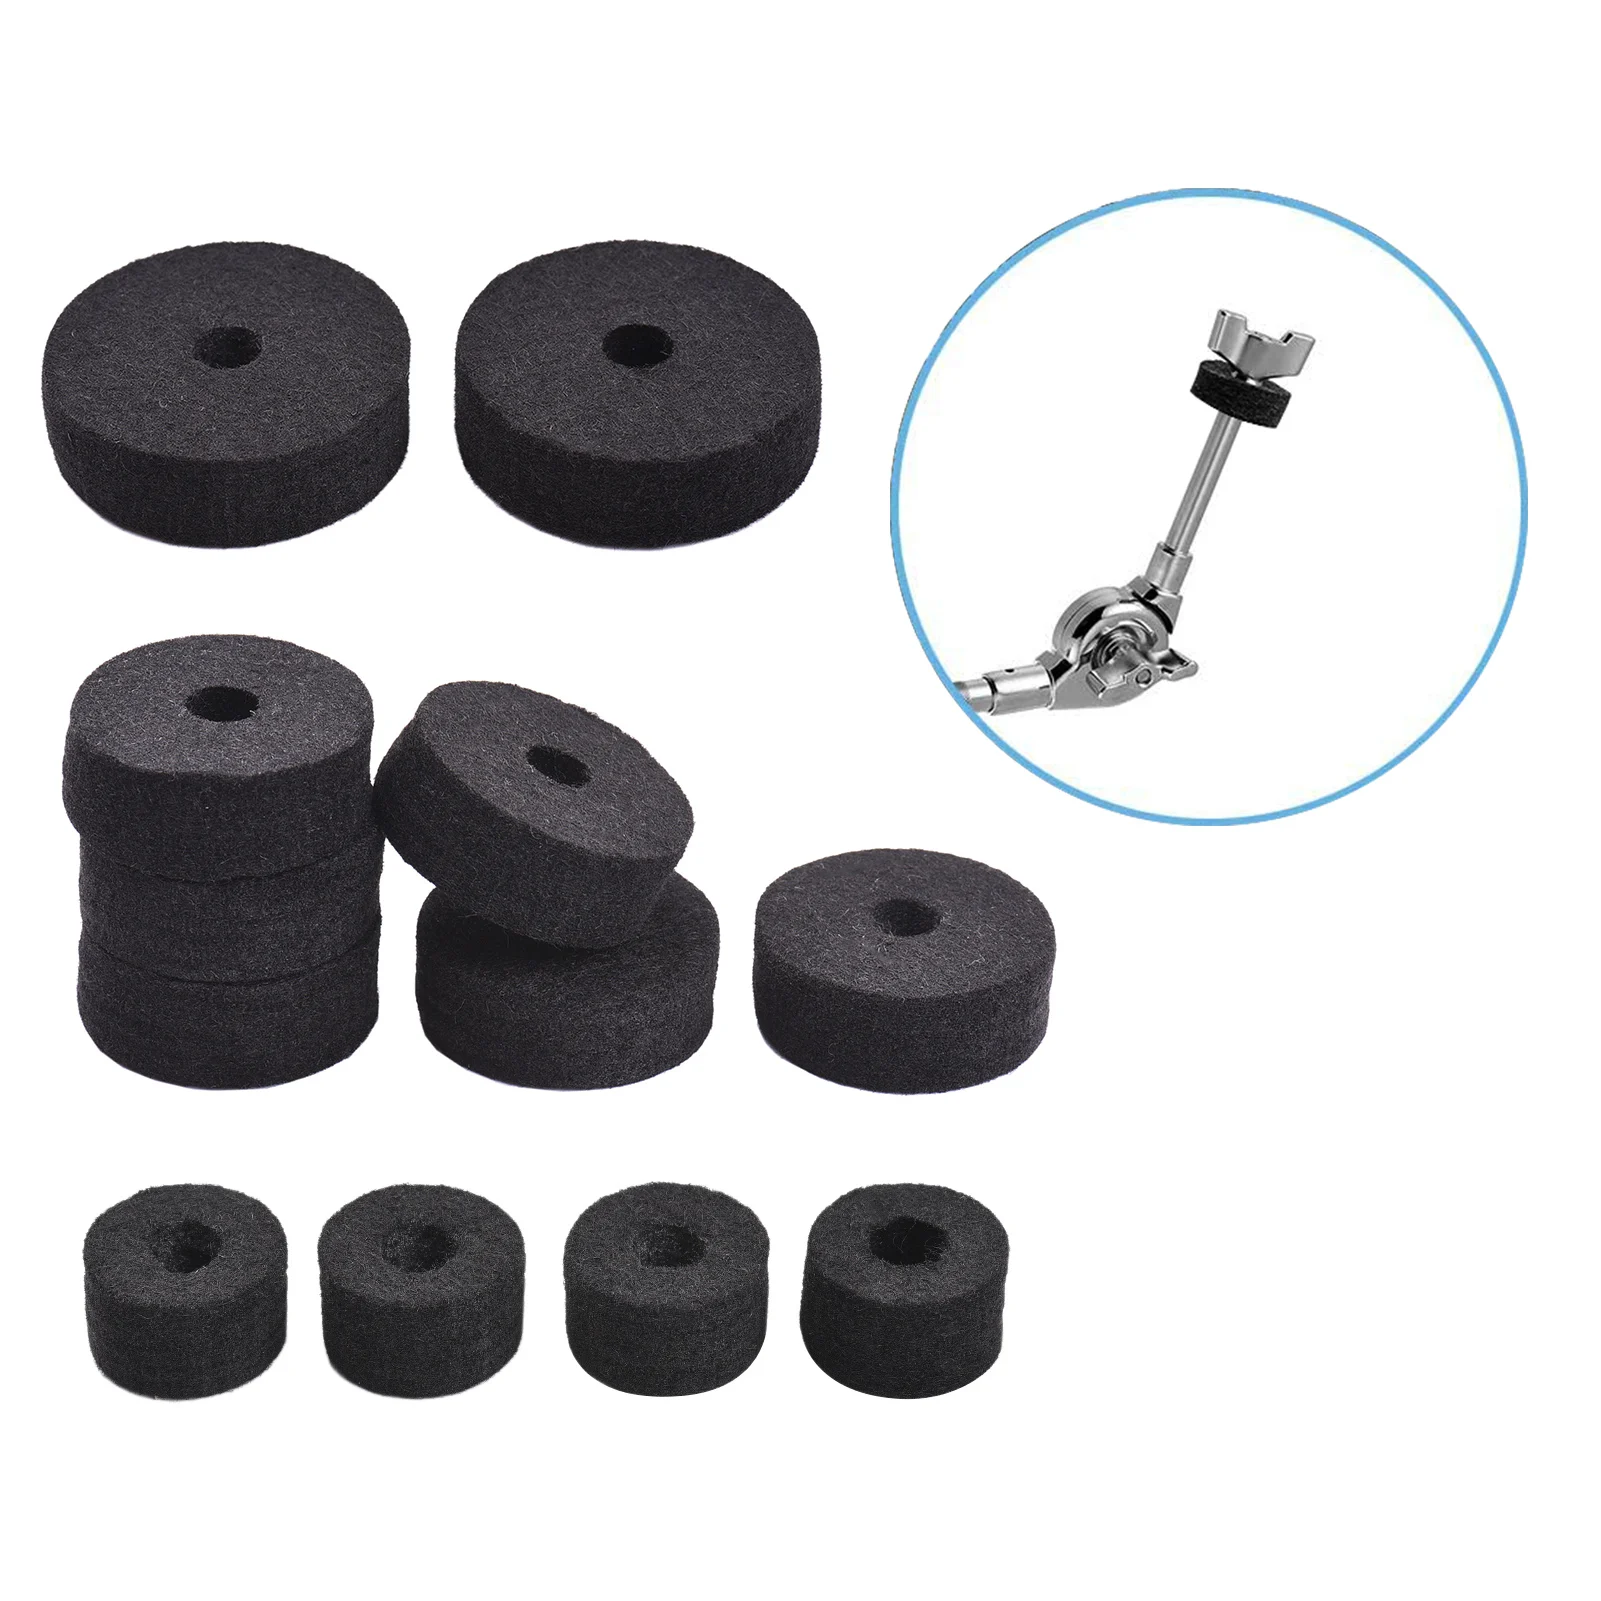 Sungpunet Cymbal Drum Replacement Accessories Drum Cymbal Felt Pad Set with Washer Nut Pads Wrench Casing Grey 23pcs 